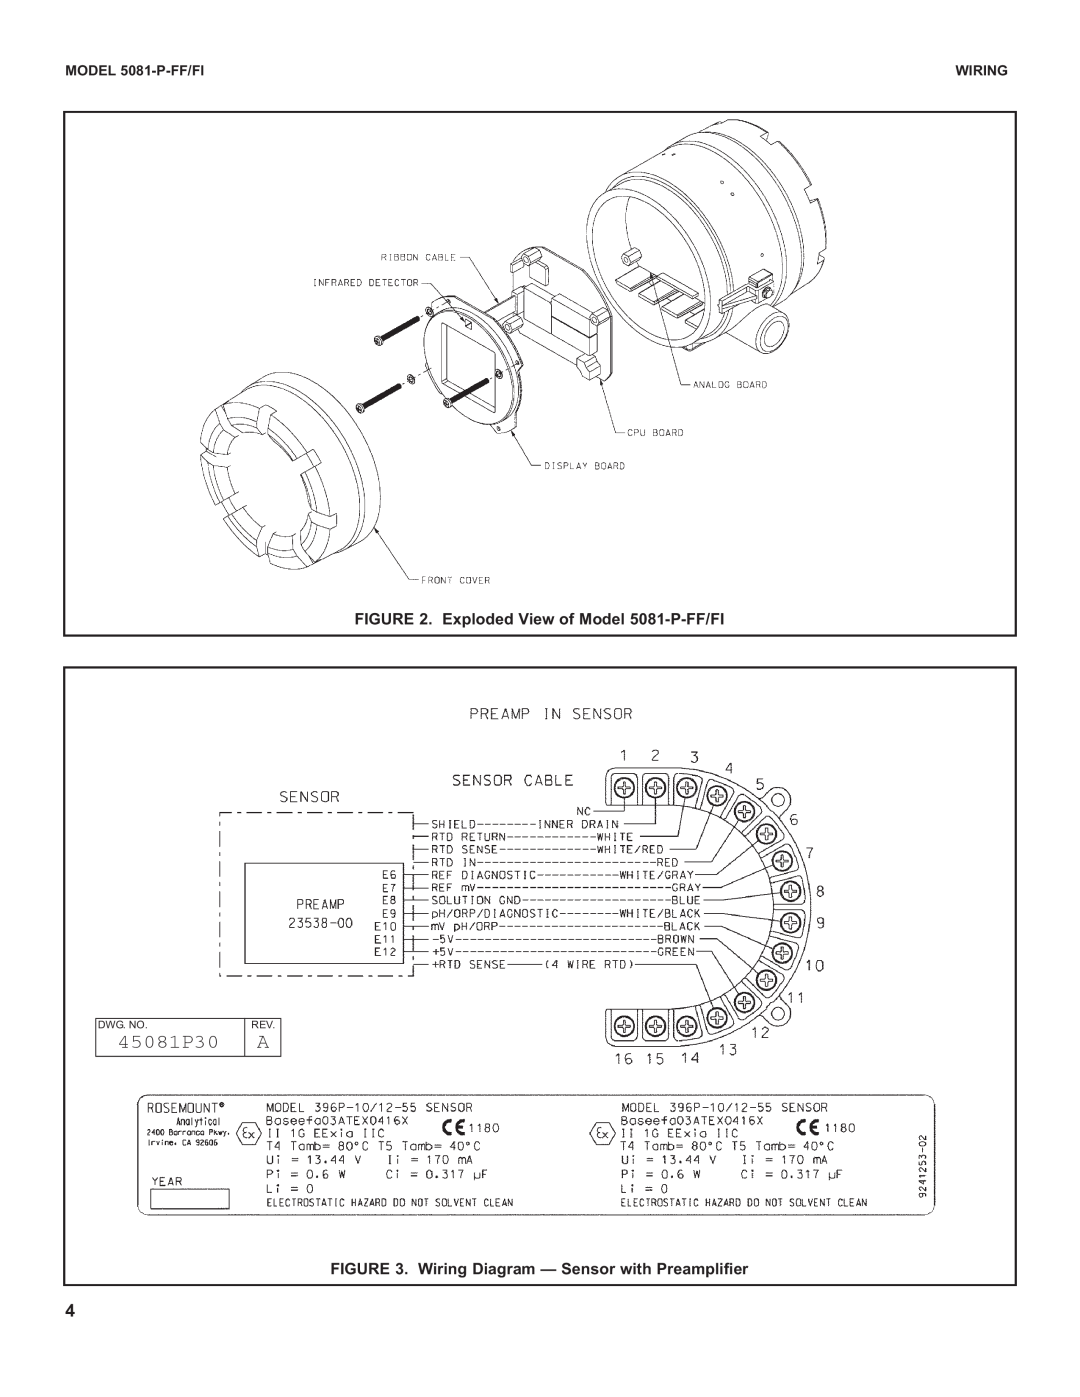 Emerson instruction sheet 45081P30, Exploded View of Model 5081-P-FF/FI, MODEL 5081-P-FF/FI, Wiring 